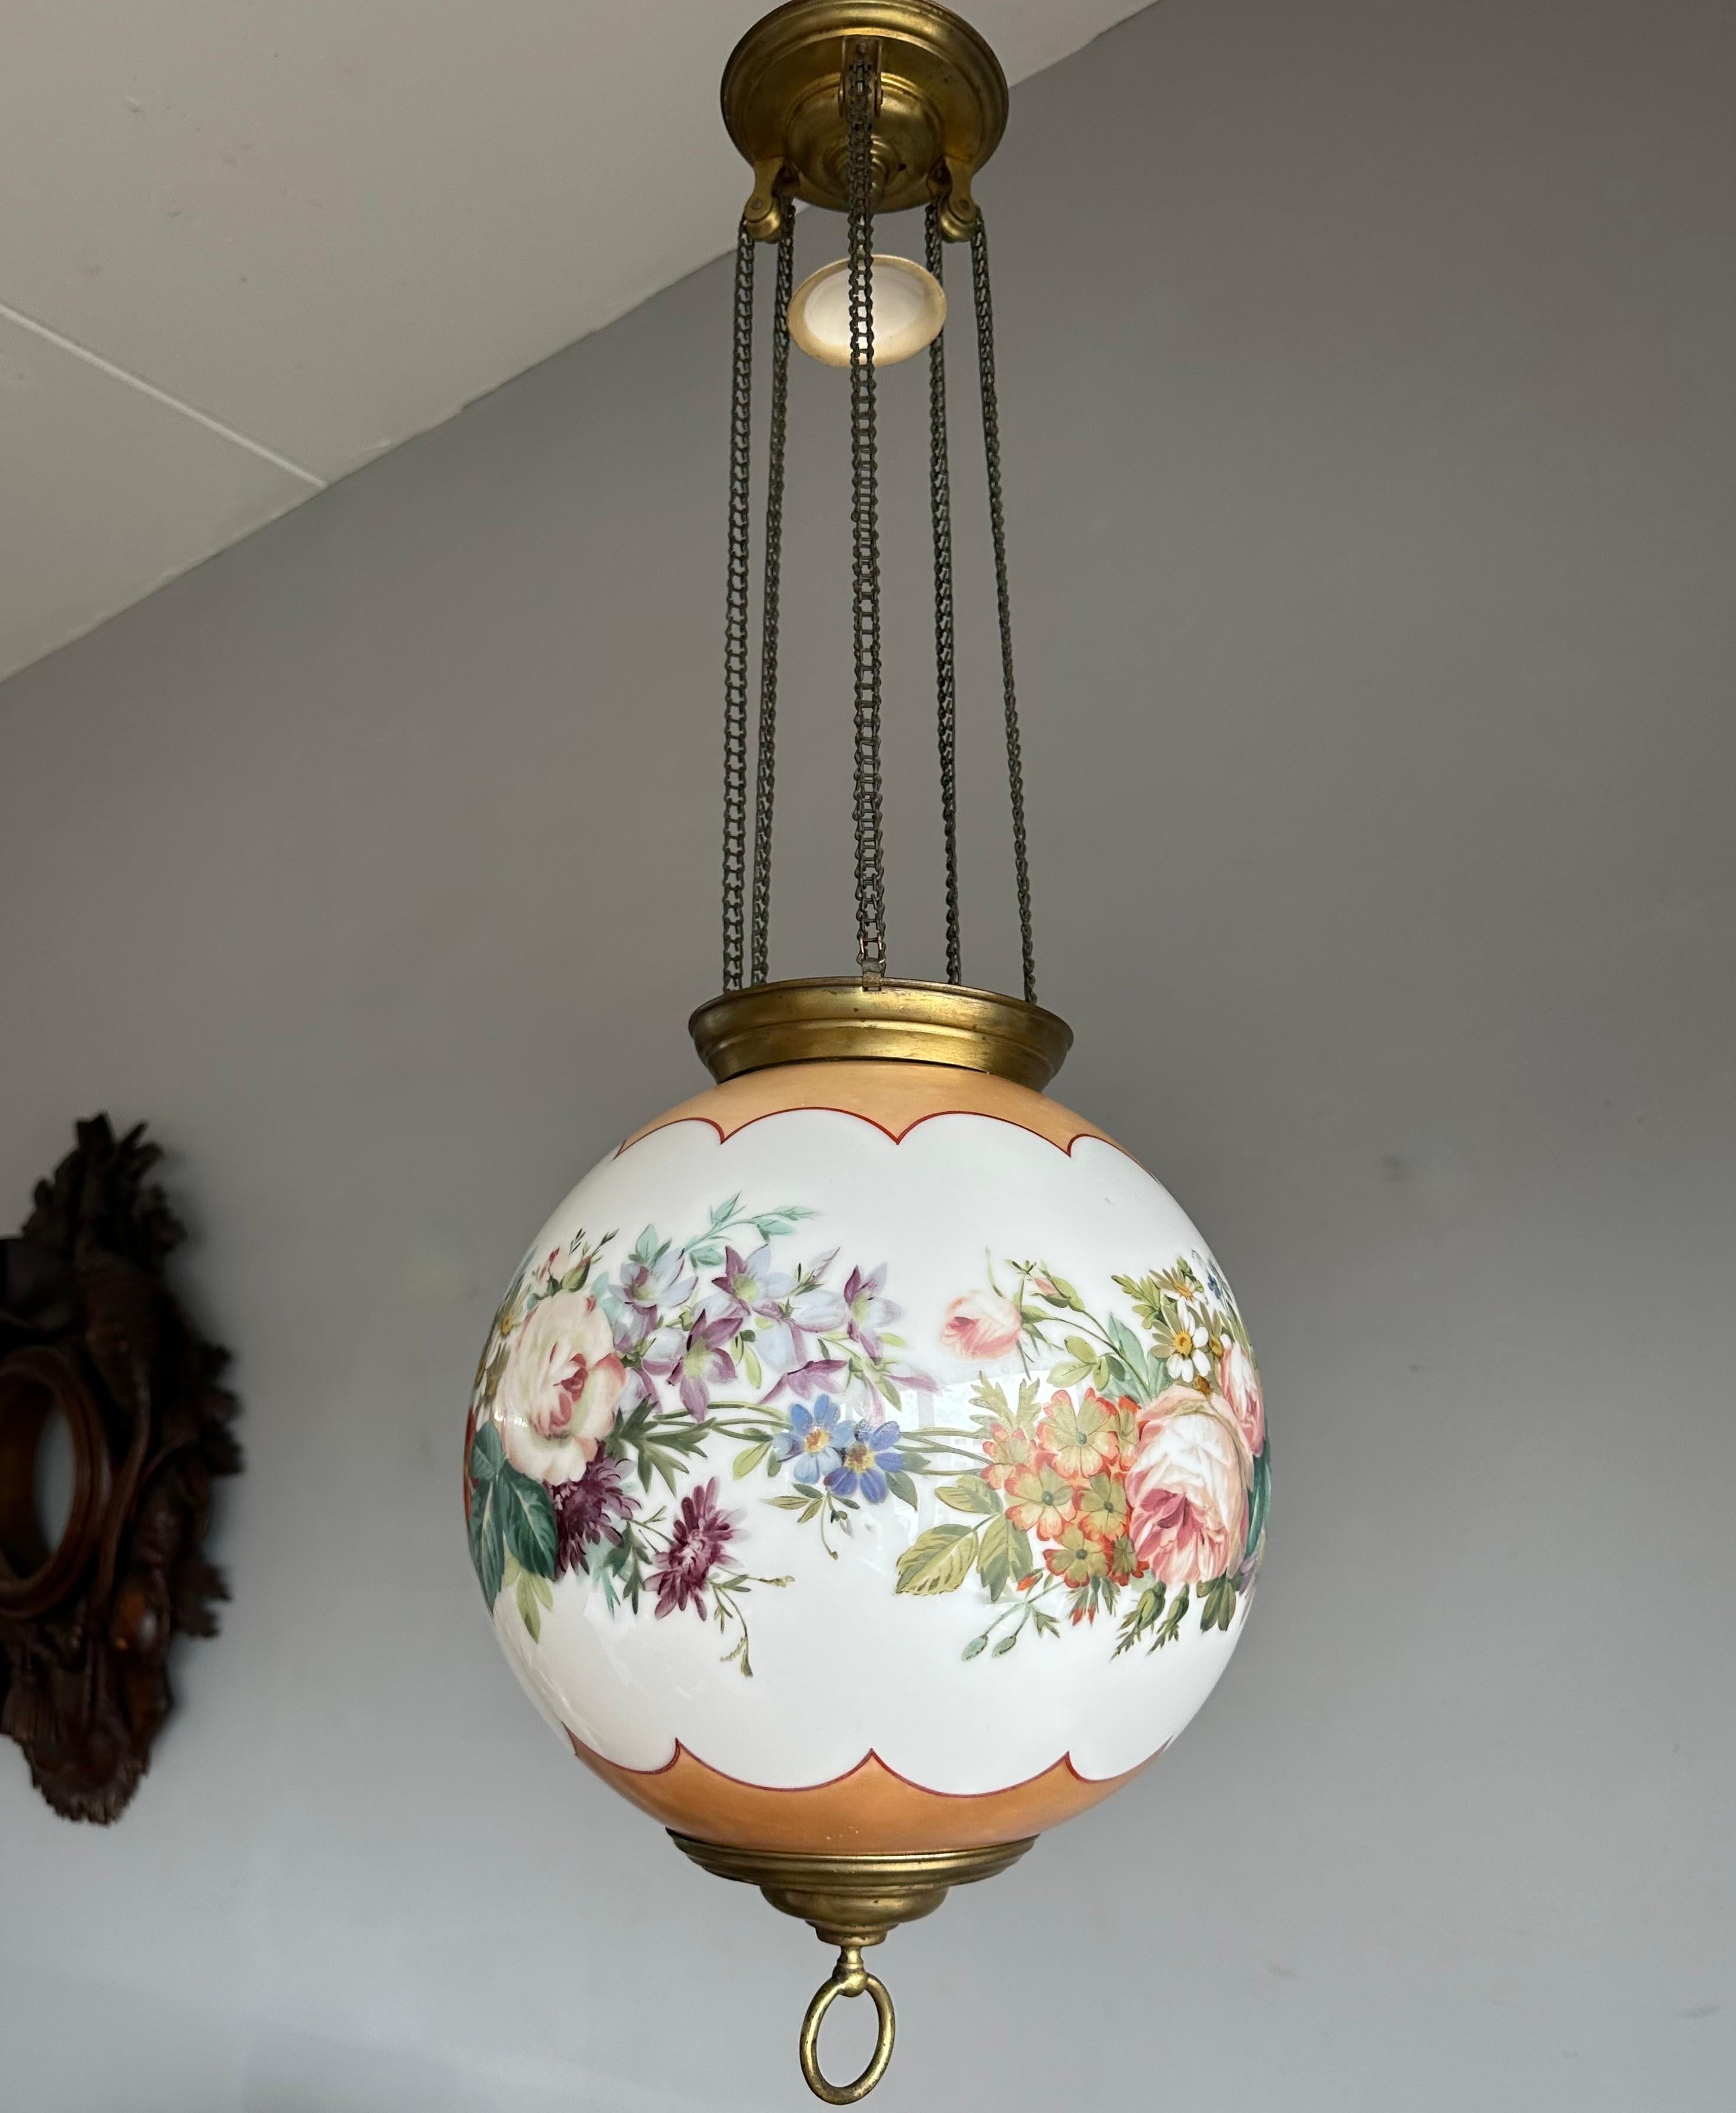 Antique Round Opaline Glass Shade Pendant Light with Wreath of Flowers Decor For Sale 4